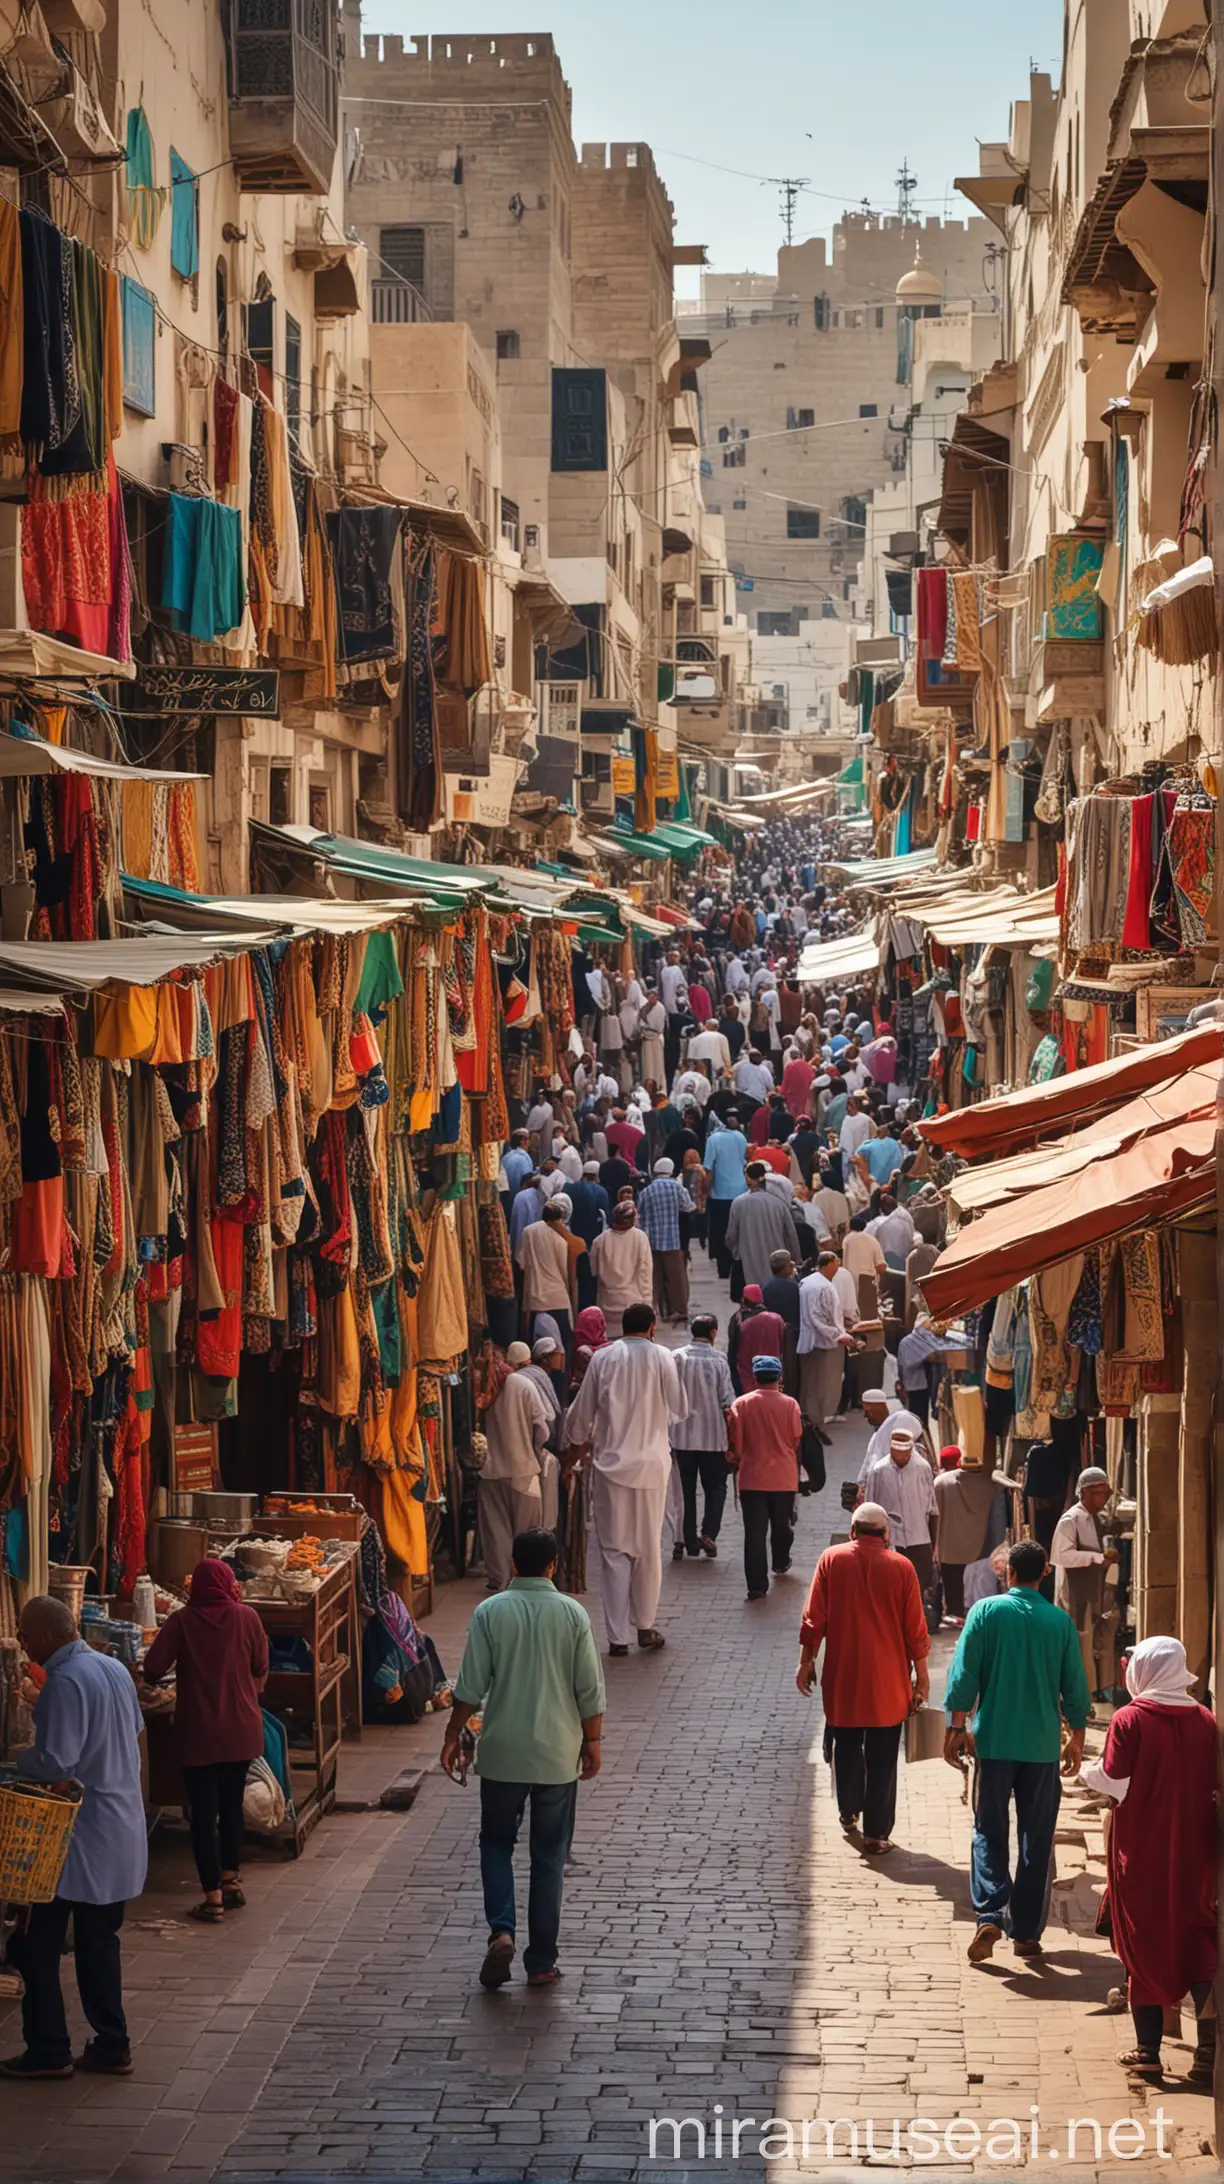 The Bustling Streets of Medina: Generate an image of the lively streets of Medina, bustling with activity, with people going about their daily lives. The image should capture the essence of a vibrant marketplace, with colorful stalls, bustling crowds, and the distinctive architecture of the city.